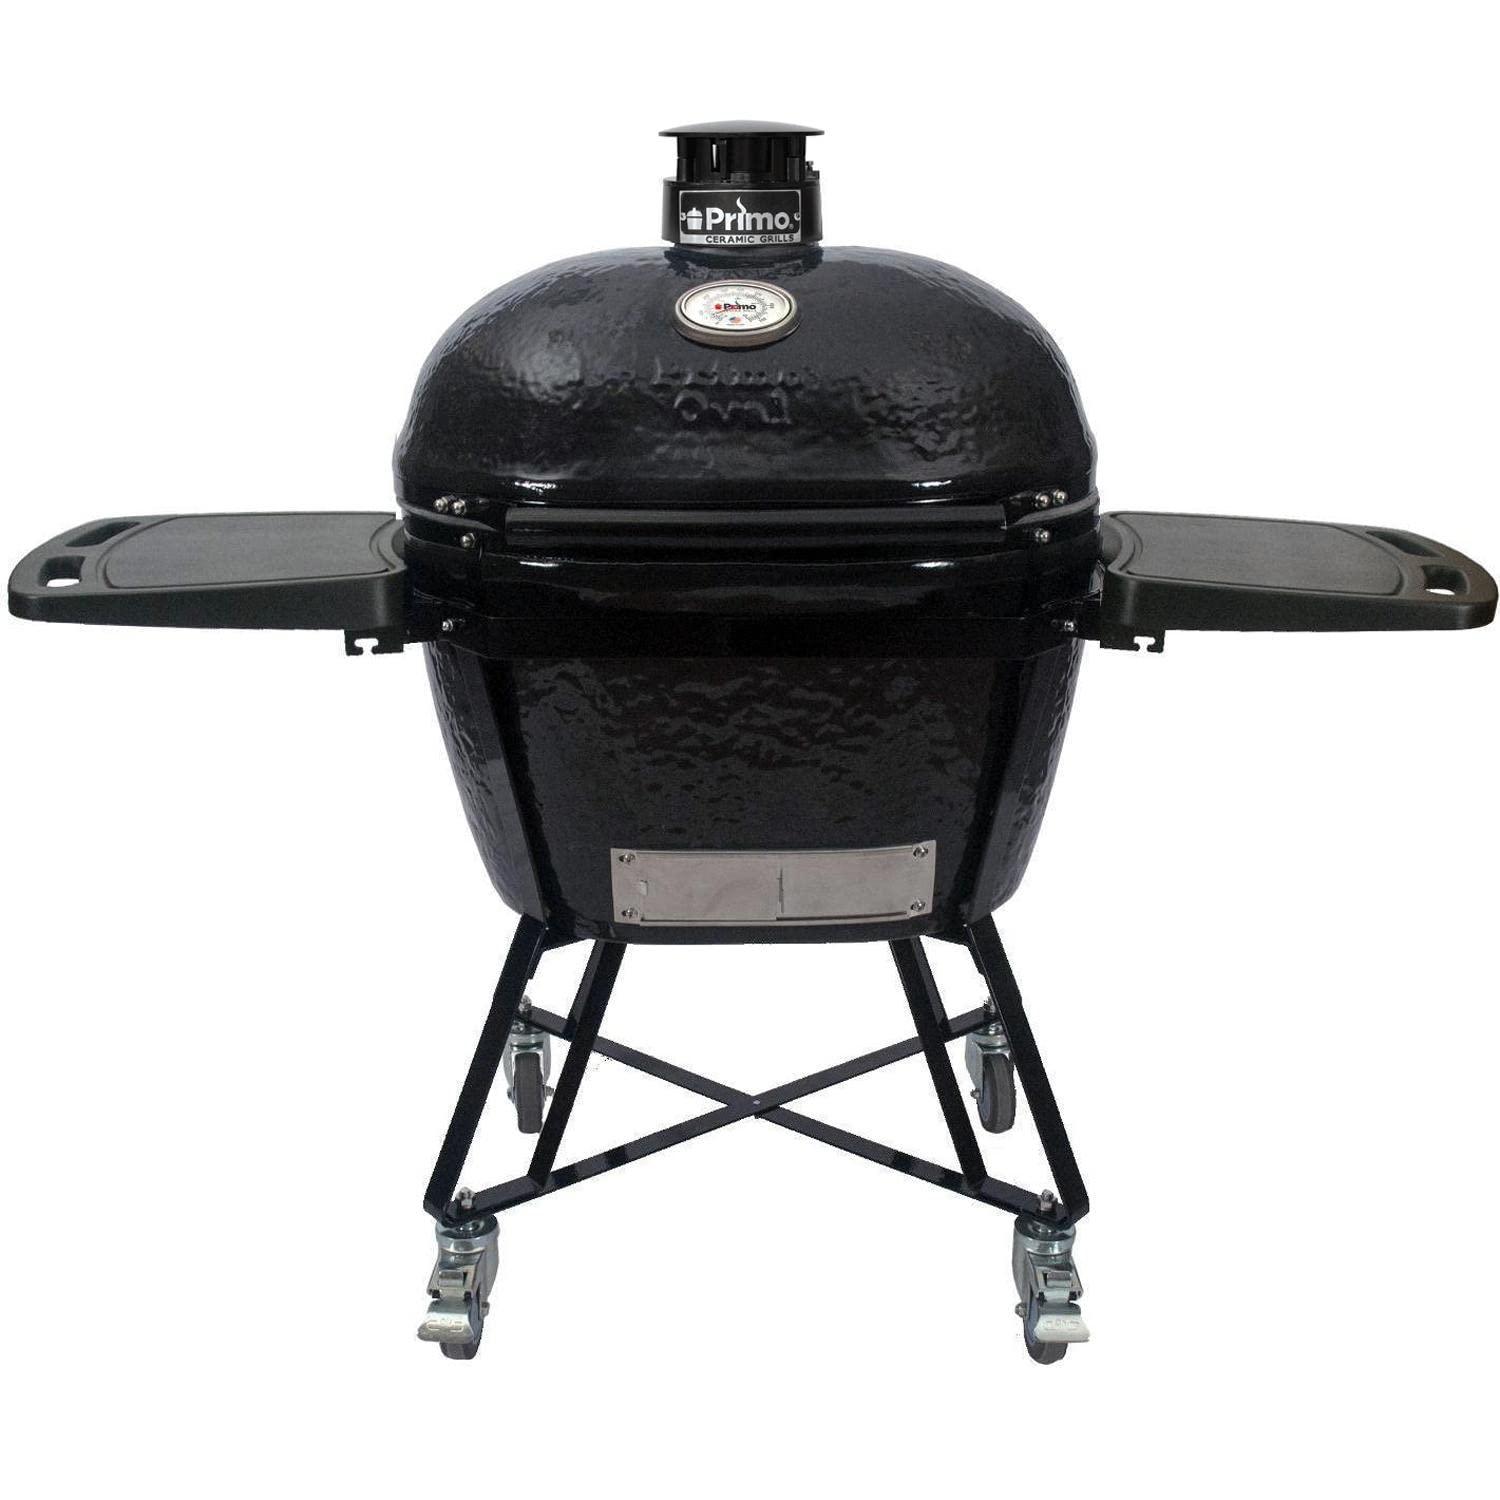 Primo Grills All-in-One Oval XL 400 Ceramic Kamado Grill with Cradle, Side Shelves, and Stainless Steel Grates - PGCXLC (2021), Black - CookCave